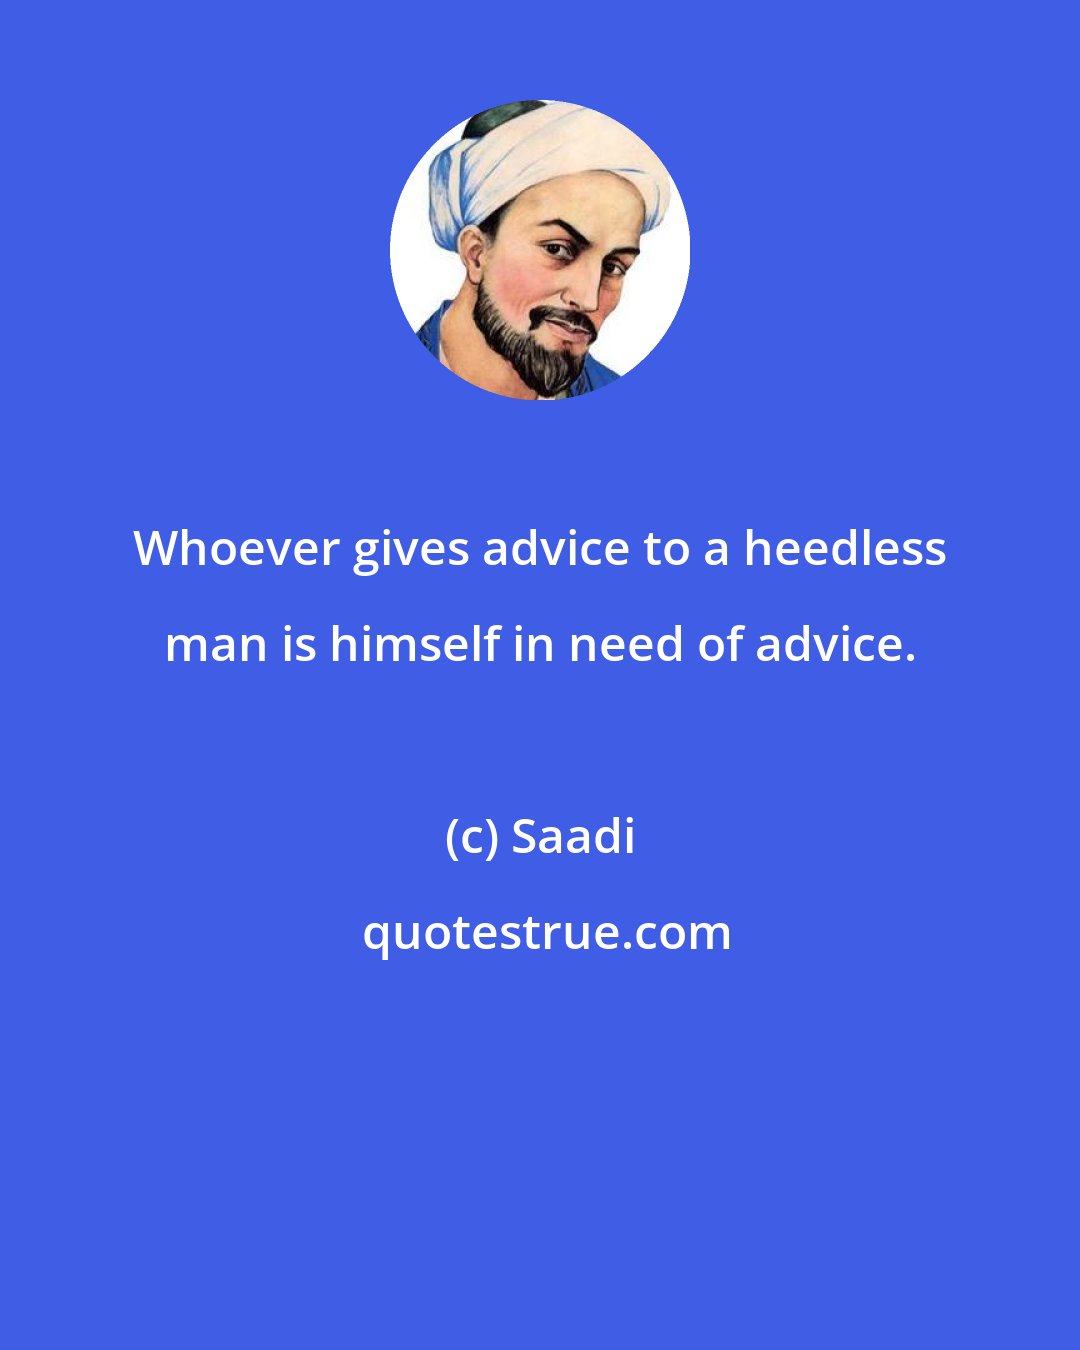 Saadi: Whoever gives advice to a heedless man is himself in need of advice.